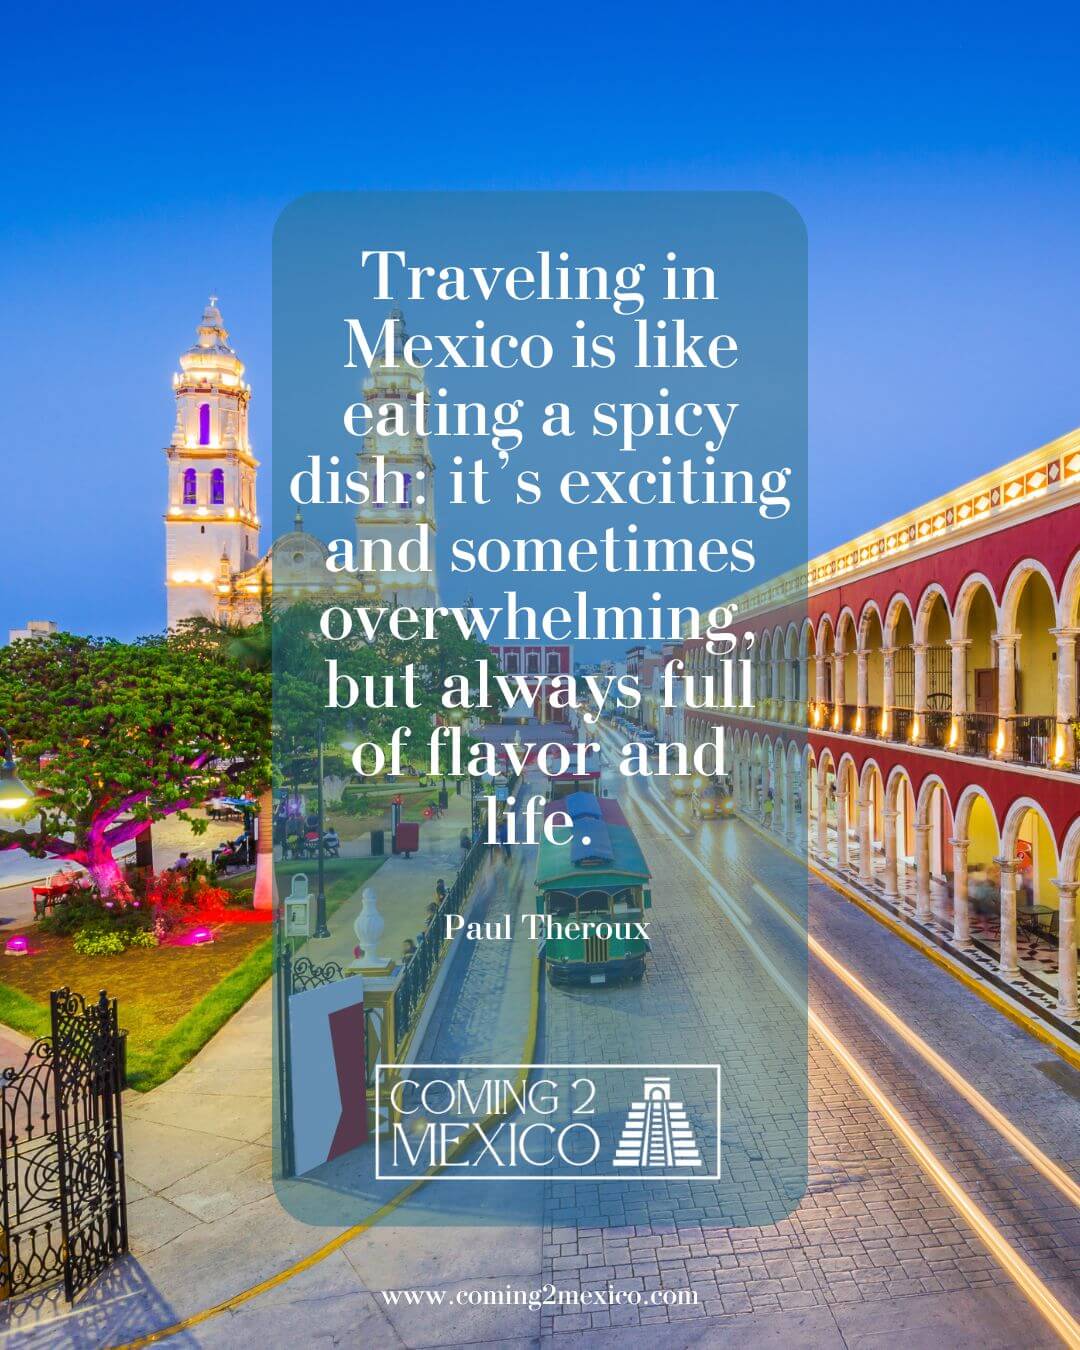 Traveling in Mexico is like eating a spicy dish: it’s exciting and sometimes overwhelming, but always full of flavor and life.